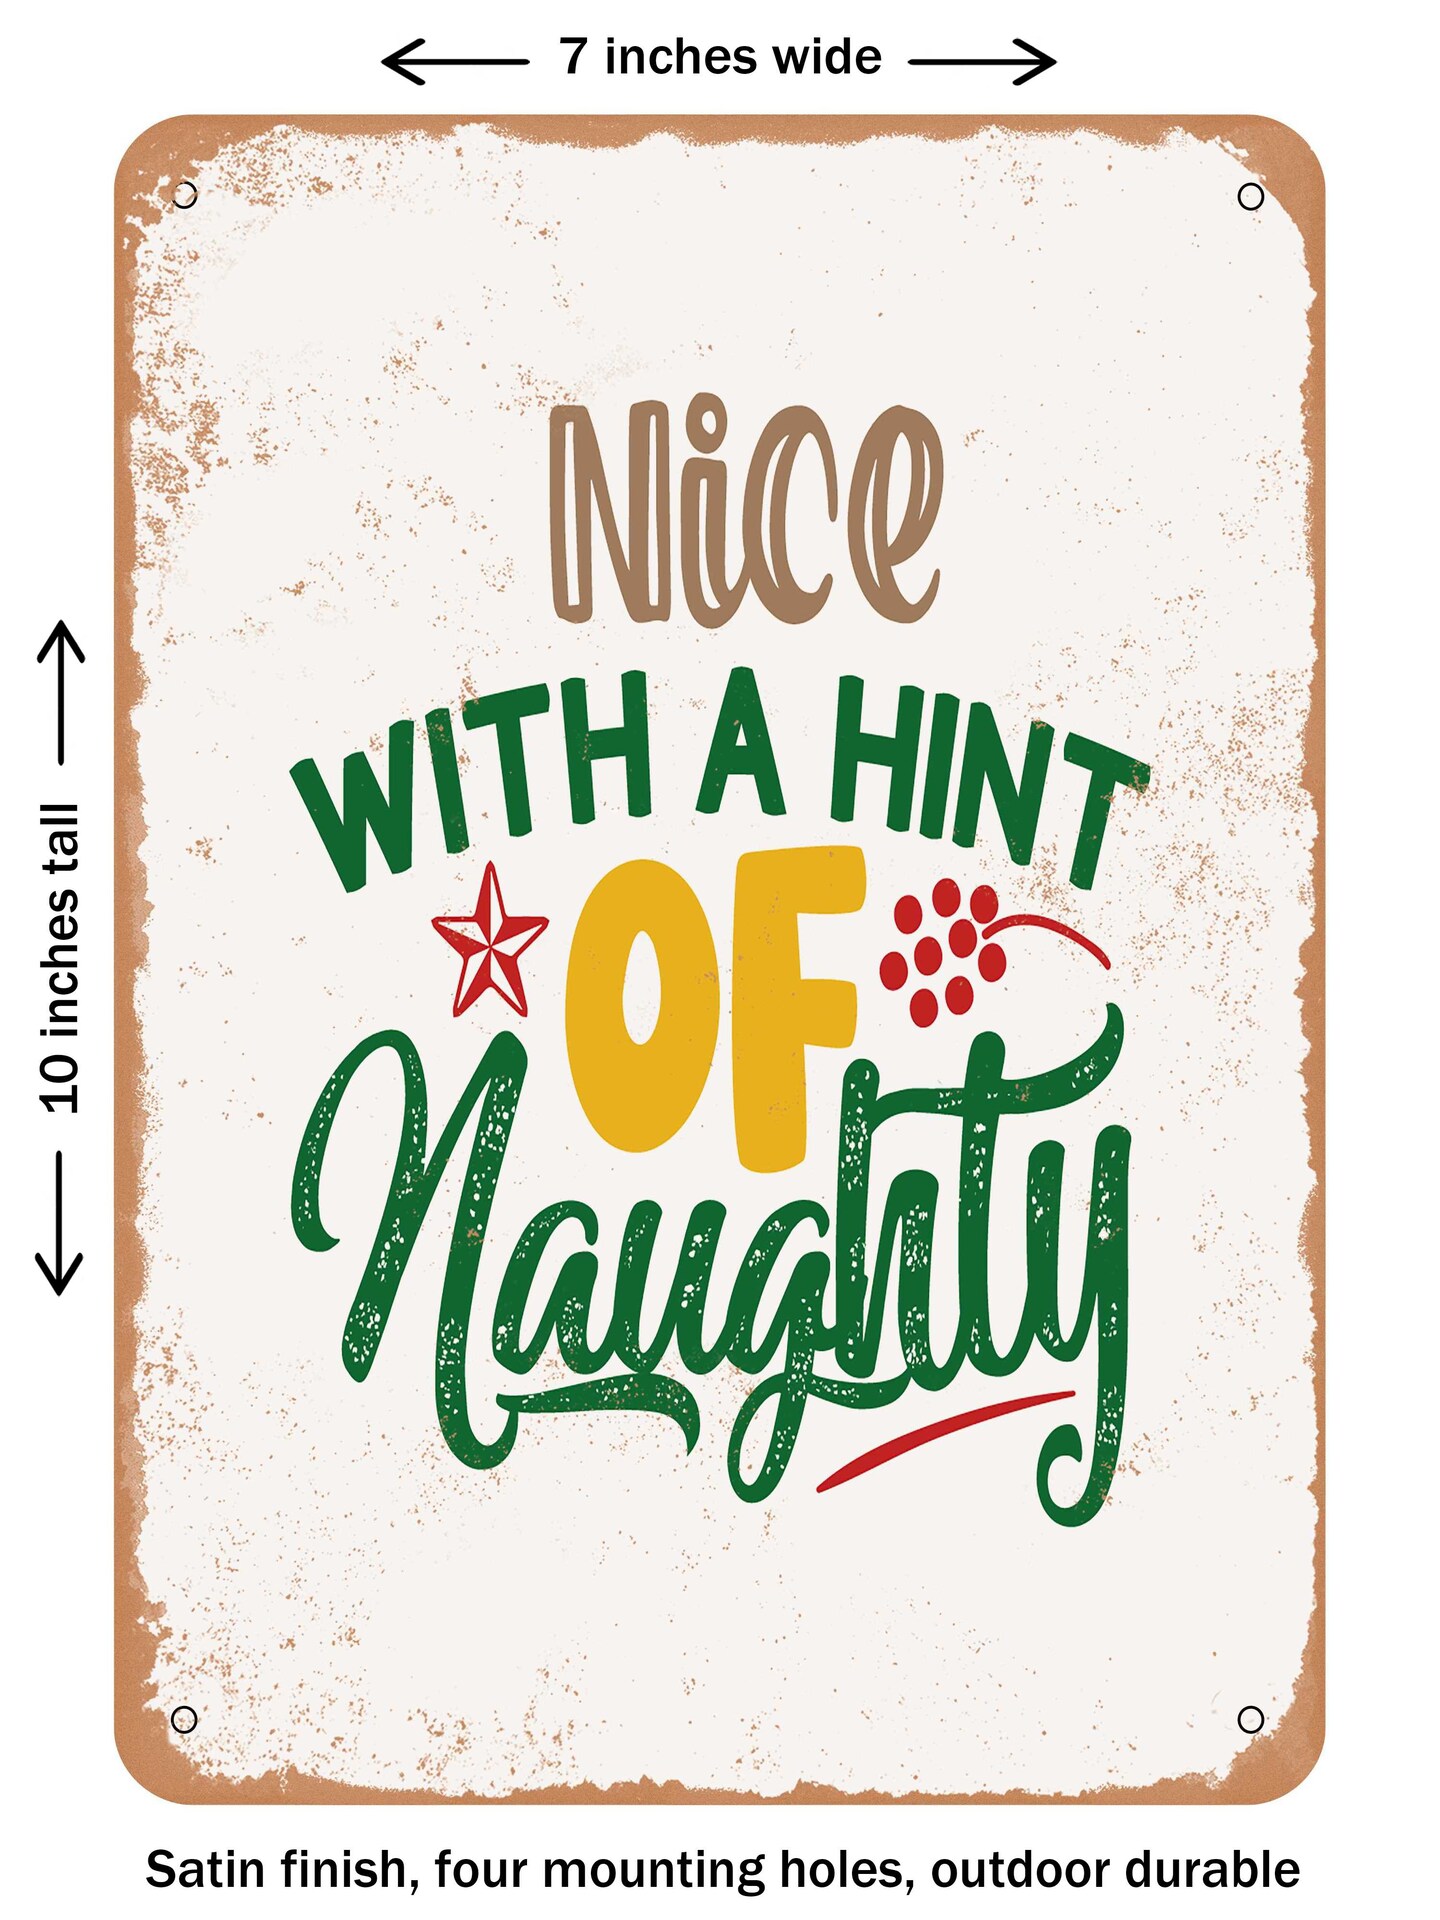 DECORATIVE METAL SIGN - Nice With a Hint of Naughty - 2 - Vintage Rusty ...